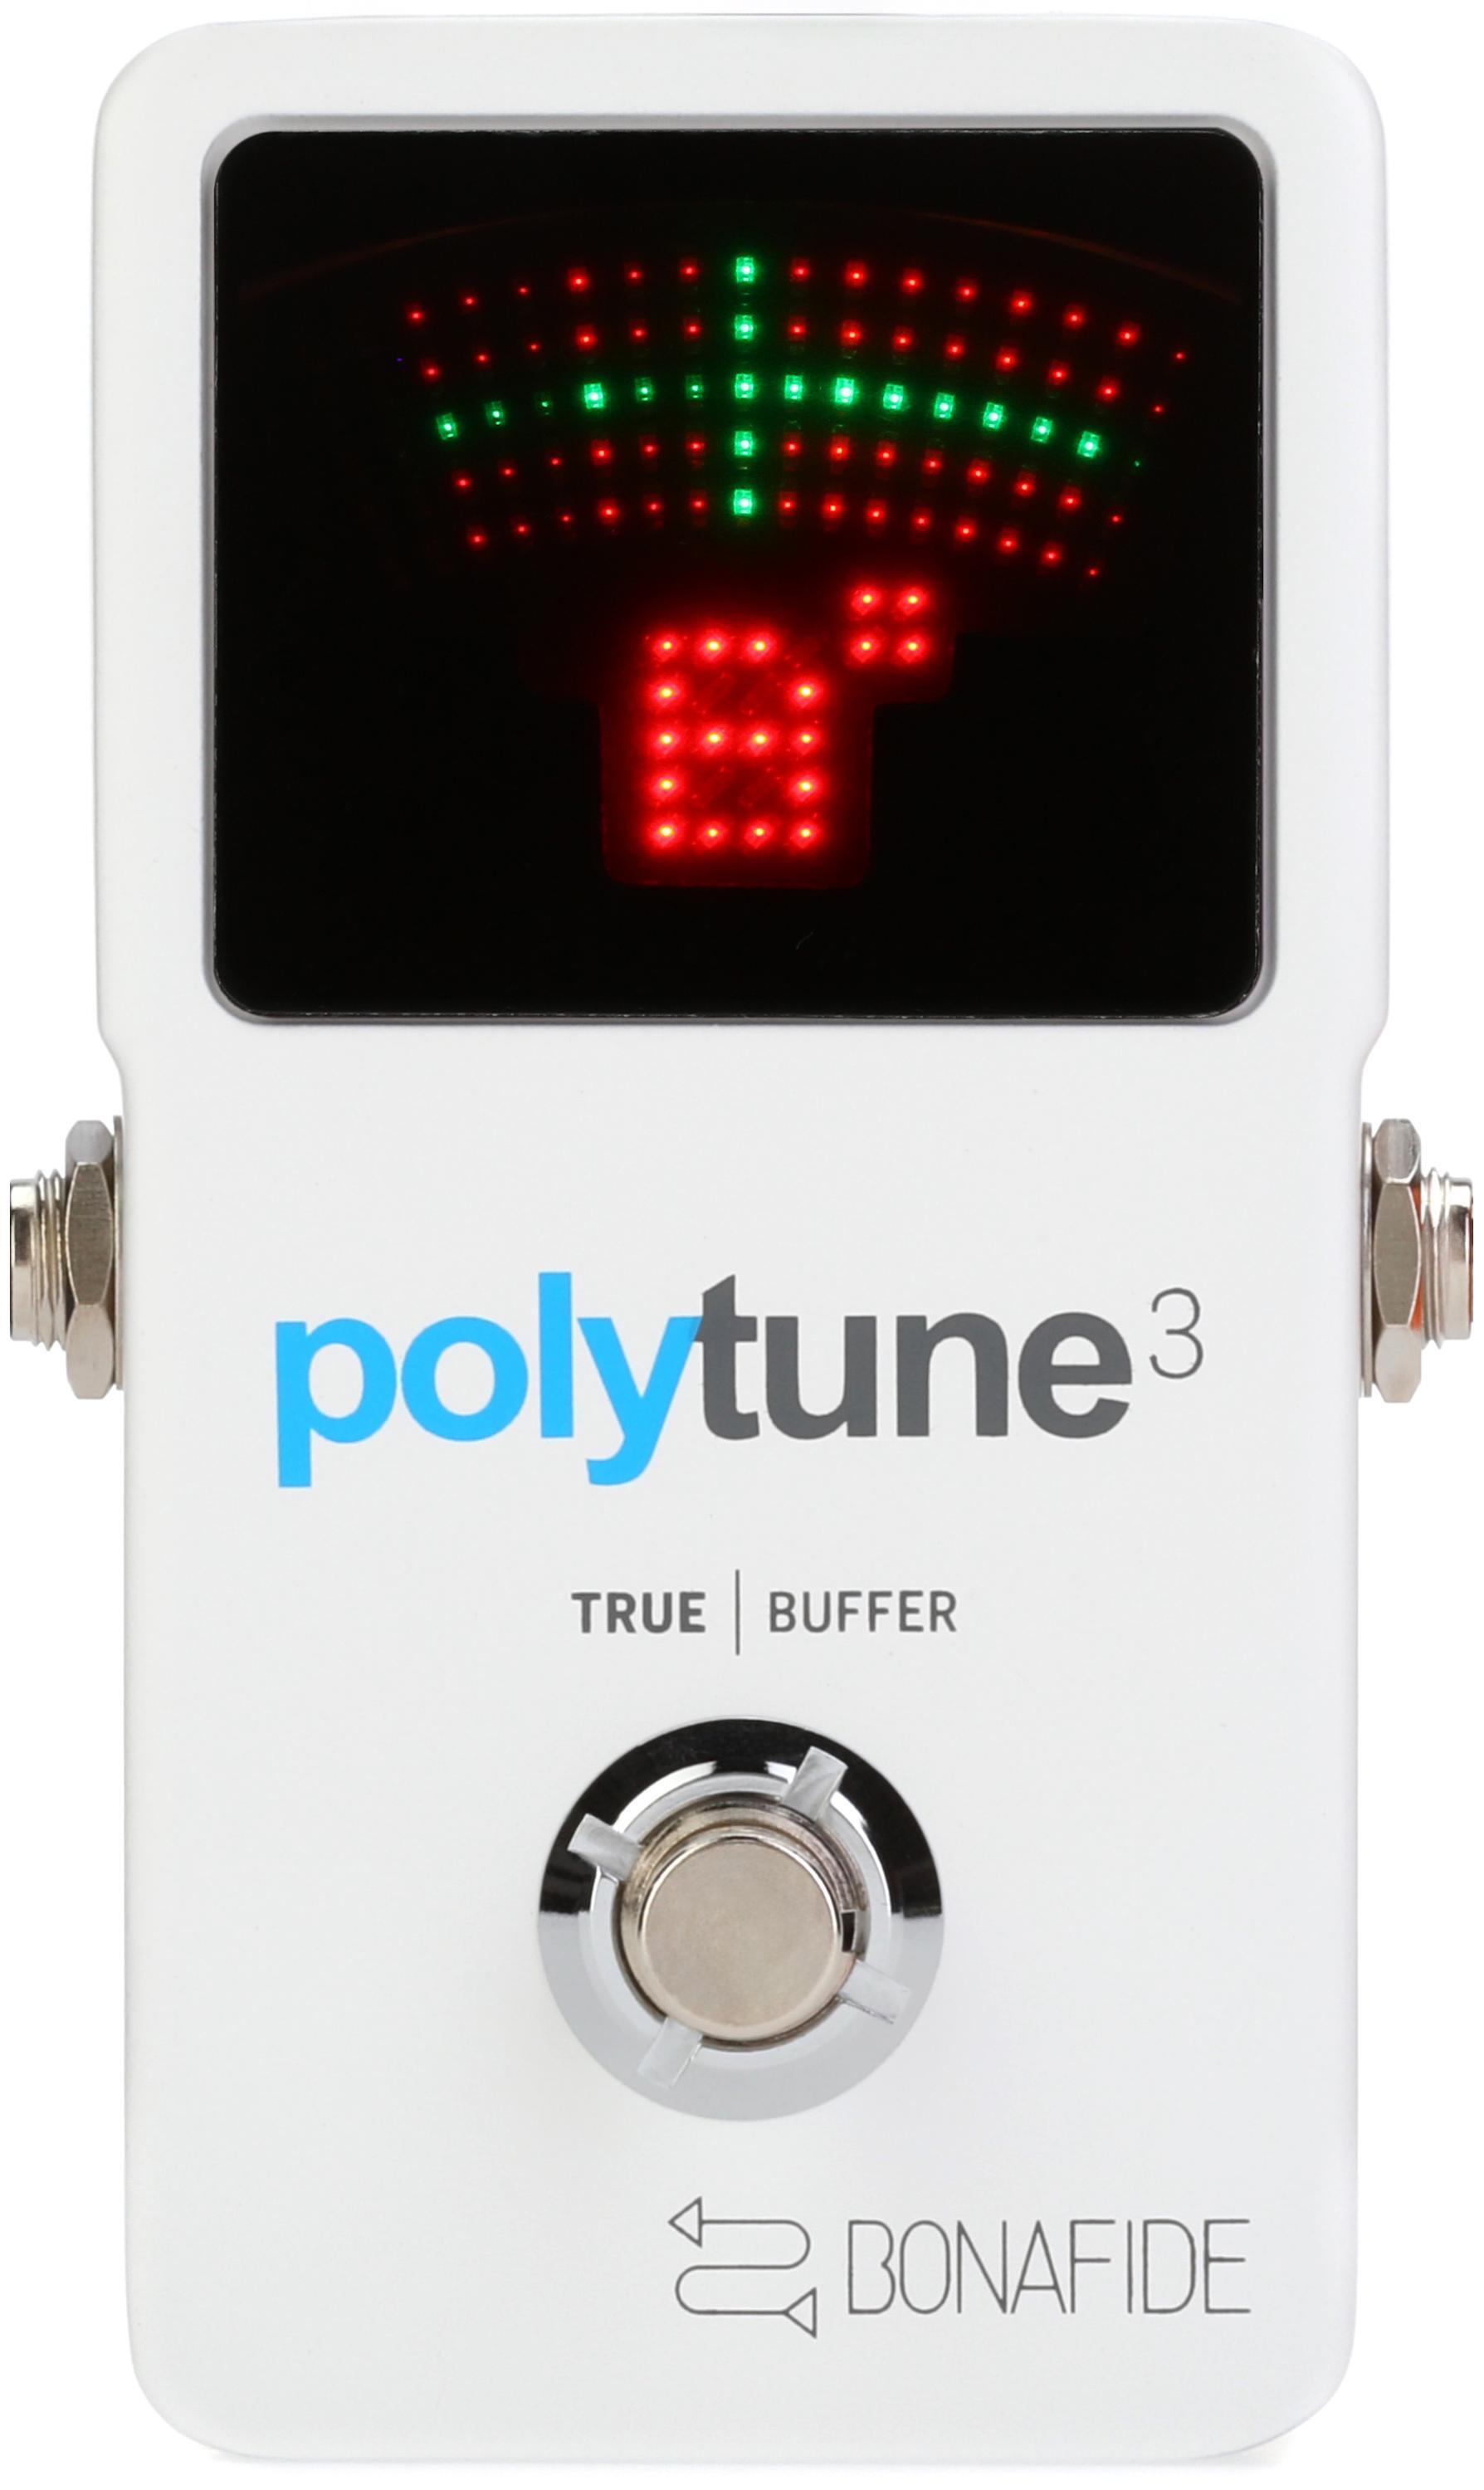 TC Electronic PolyTune 3 Polyphonic LED Guitar Tuner Pedal with Buffer